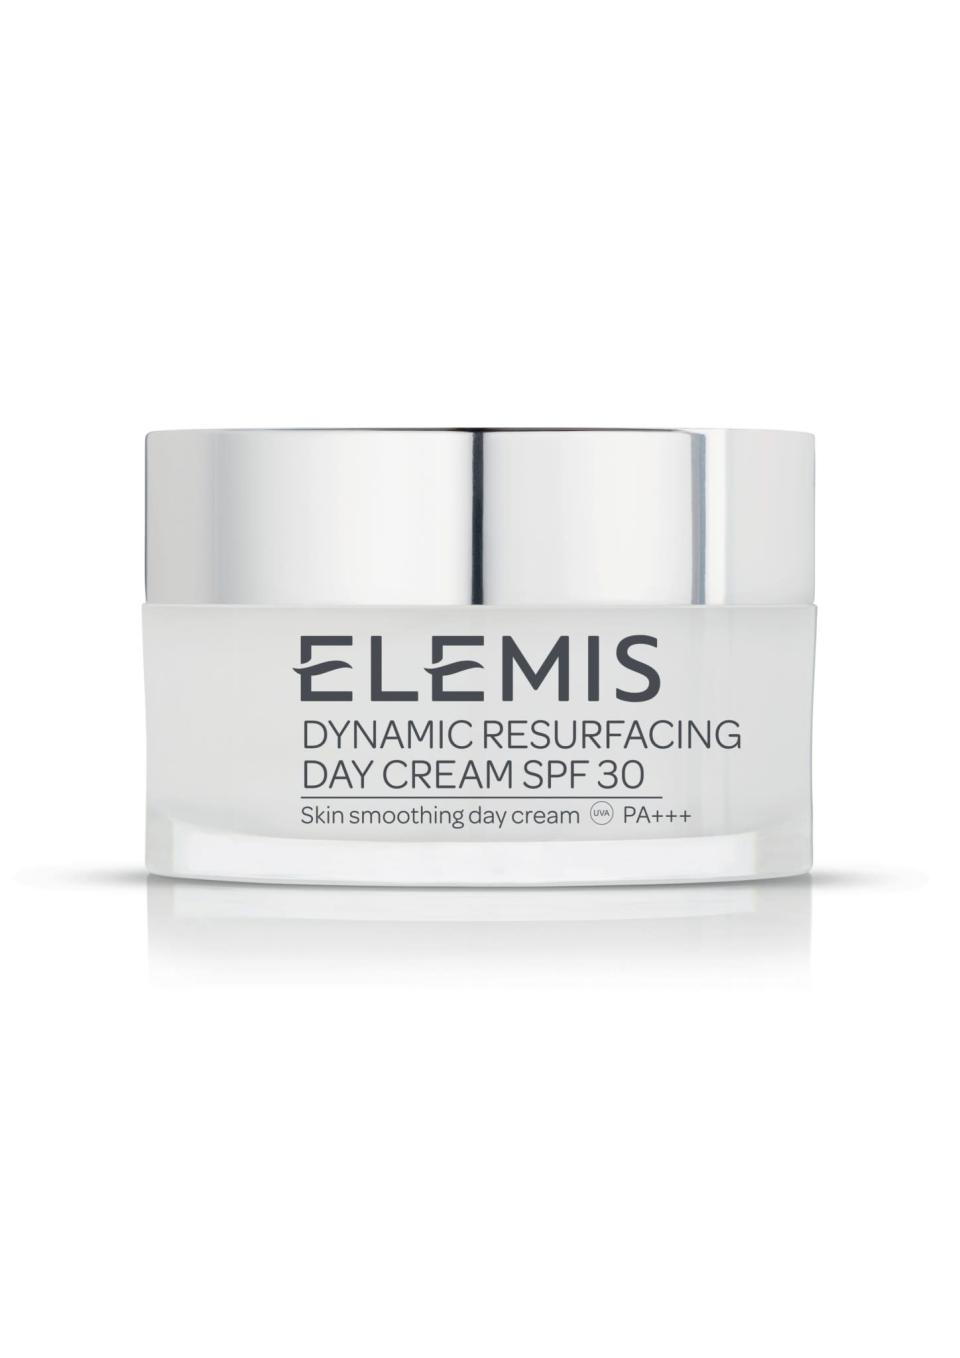 <p>This new addition to Elemis’ impressive Dynamic Resurfacing range includes added sun protection in the form of SPF 30. Perfect for those summer days, this highly moisturising cream gently eats away at your dead skin cells to leave your face looking smooth with an even complexion.<br><i>£82, available from <a rel="nofollow noopener" href="http://www.elemis.com/" target="_blank" data-ylk="slk:Elemis" class="link rapid-noclick-resp">Elemis</a> in June.</i> </p>